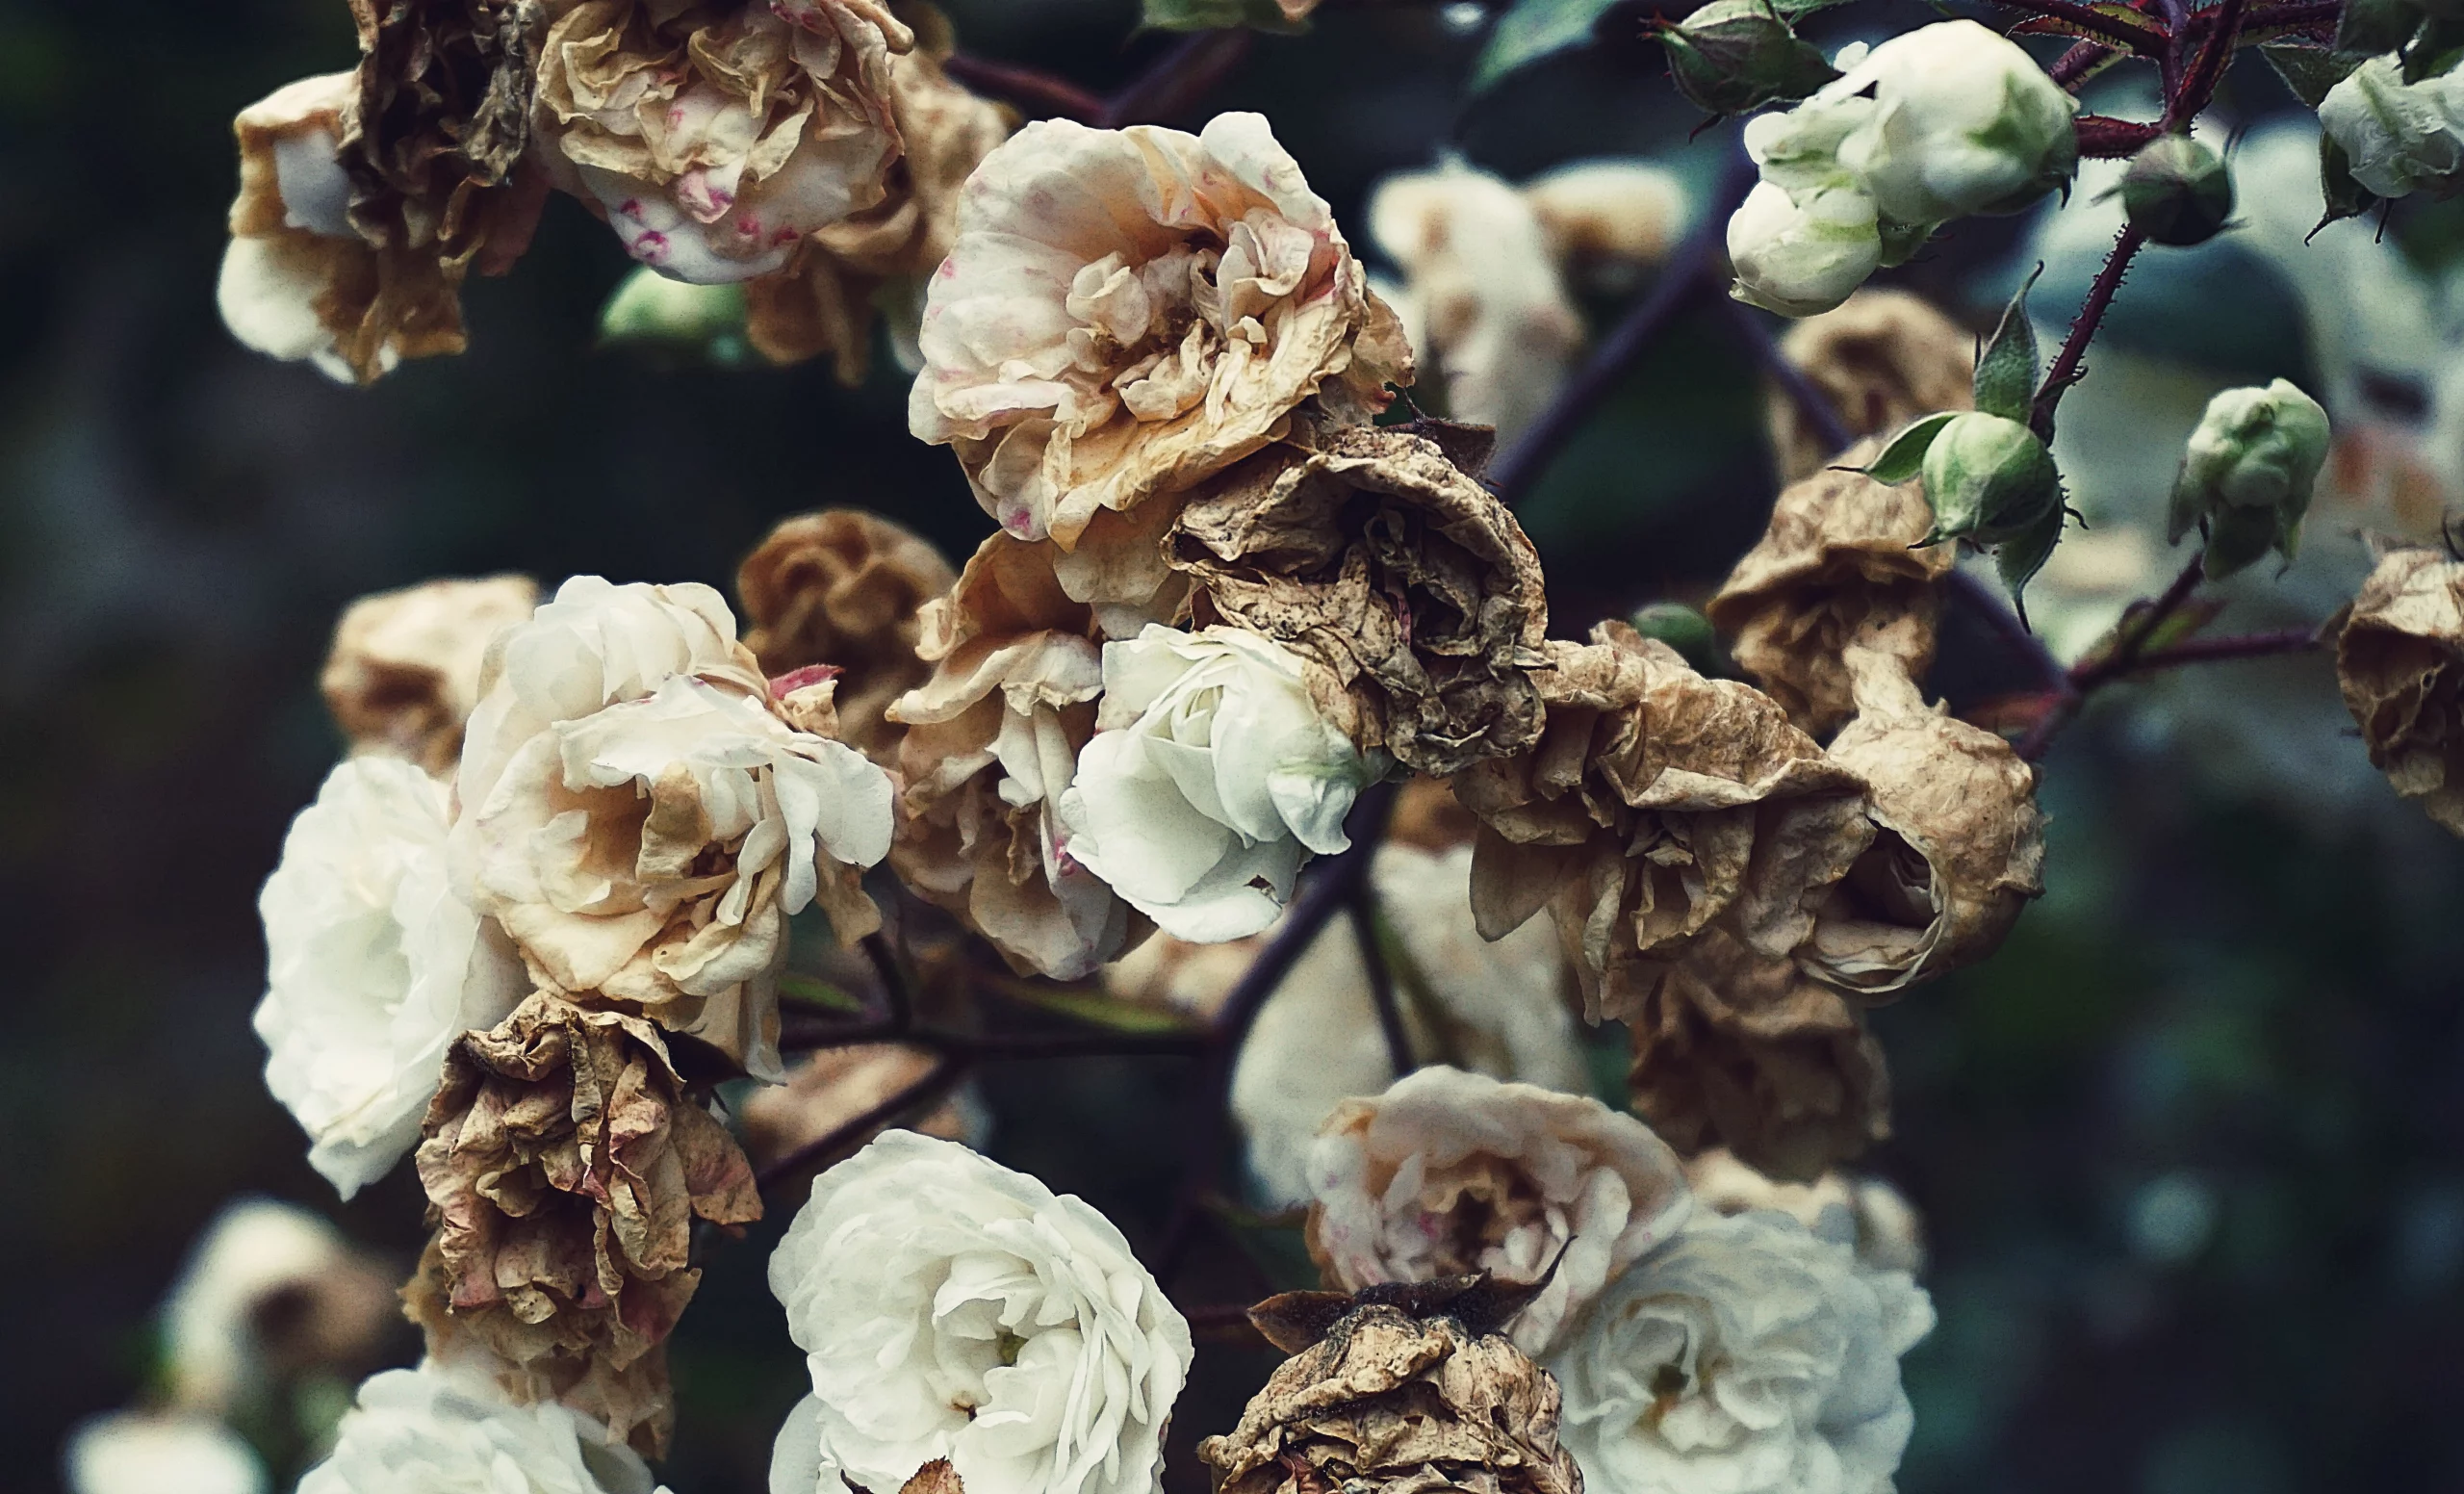 Why dried flowers are beautiful